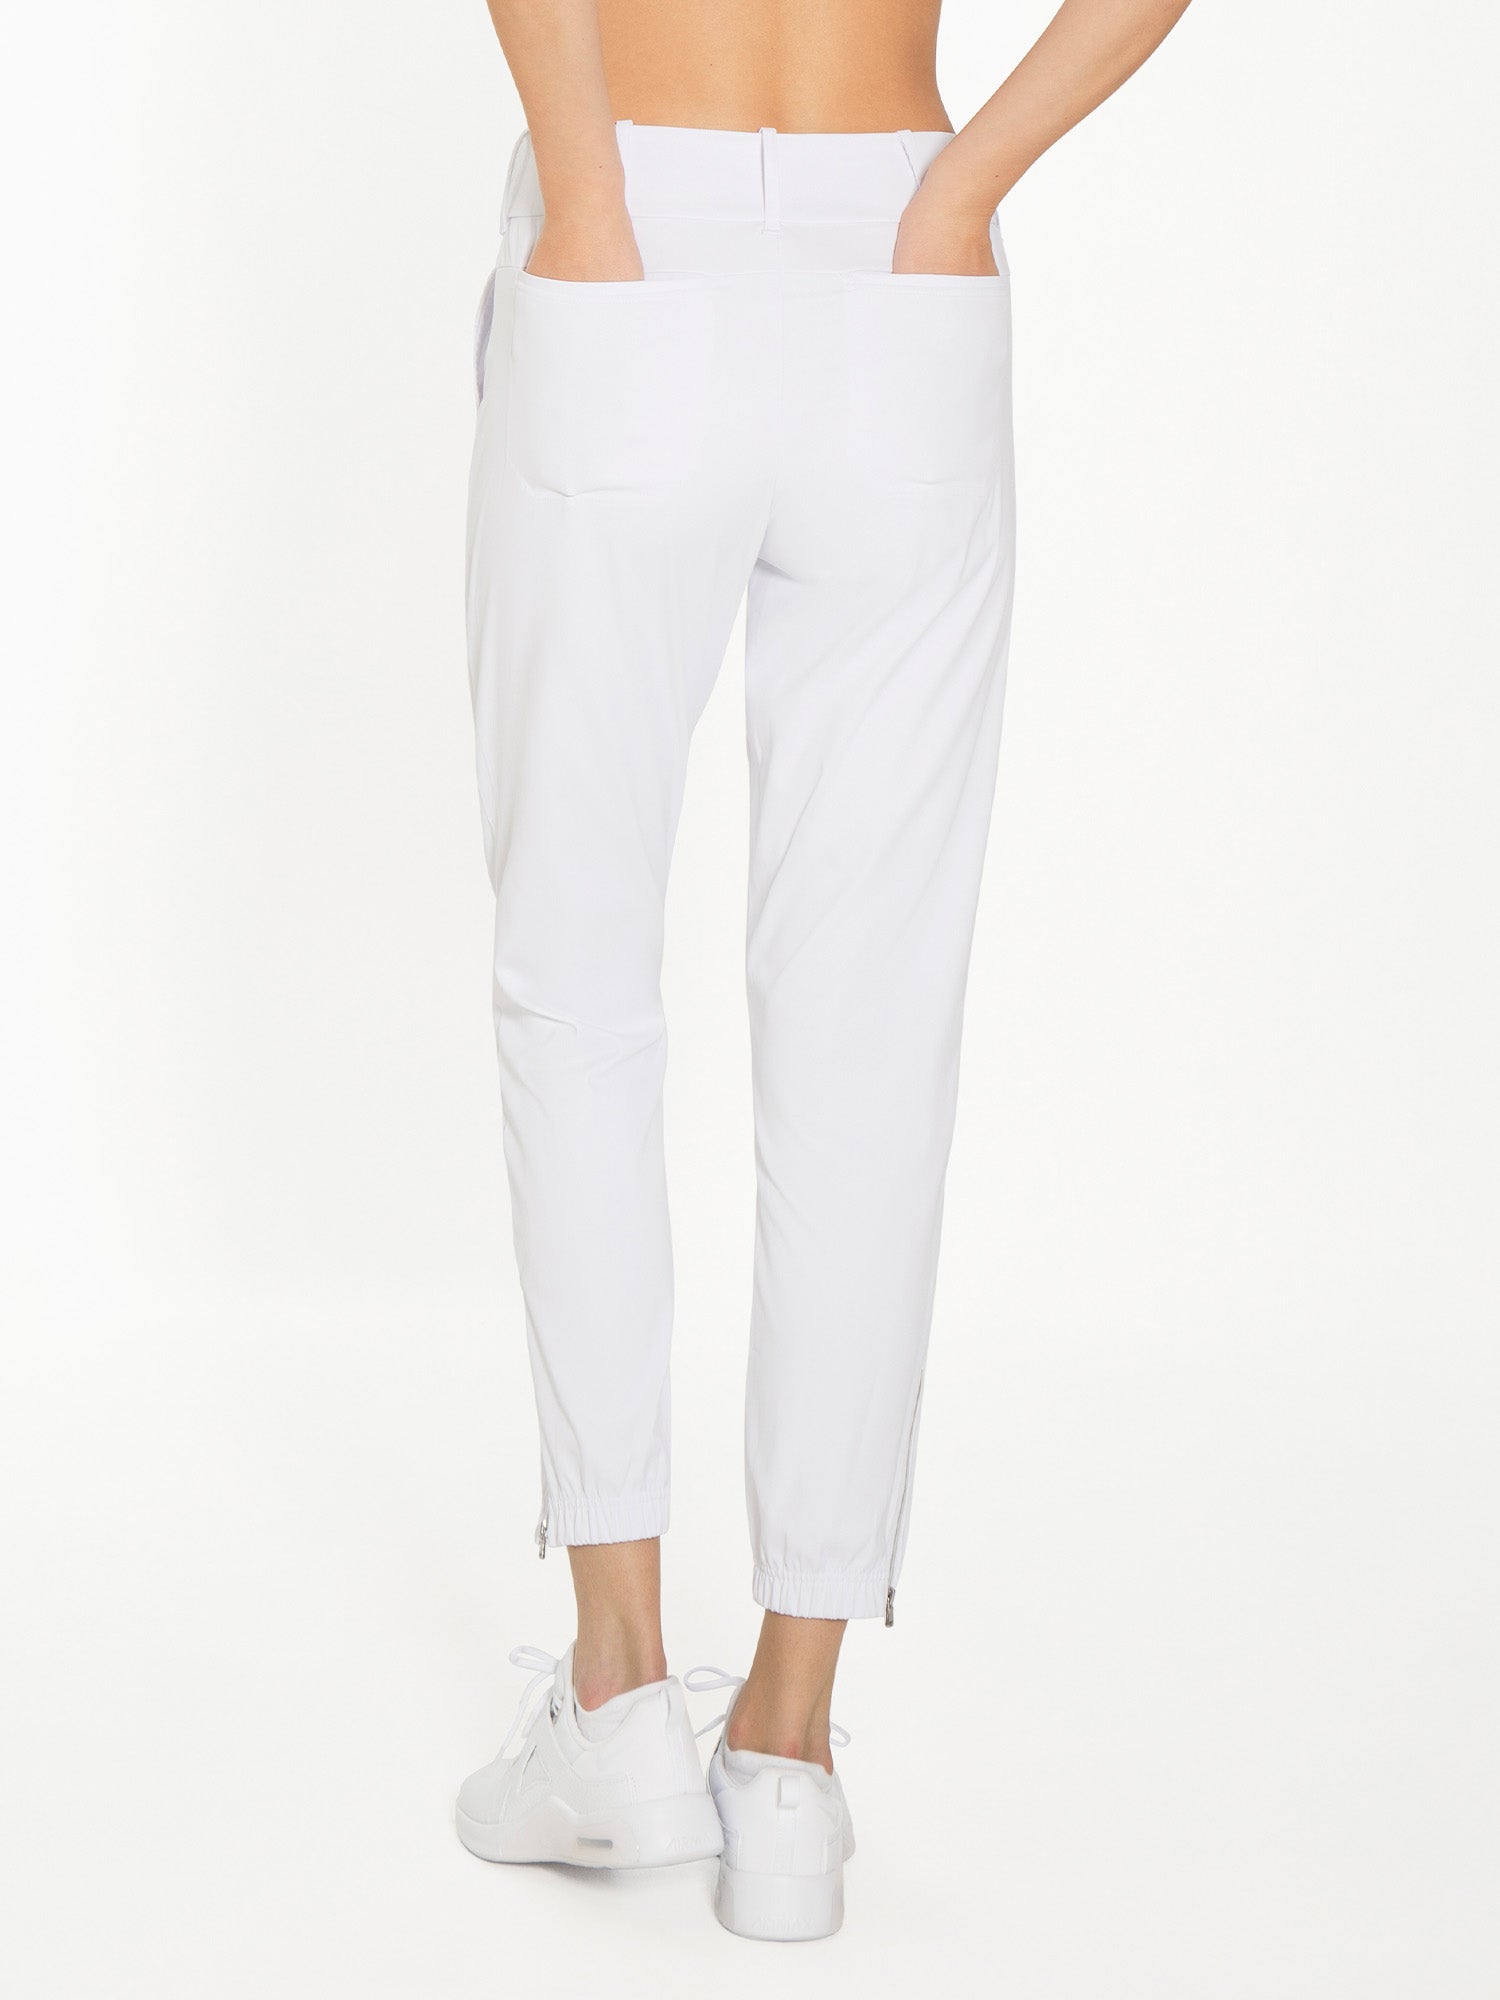 Easy Fit Active Pants - White